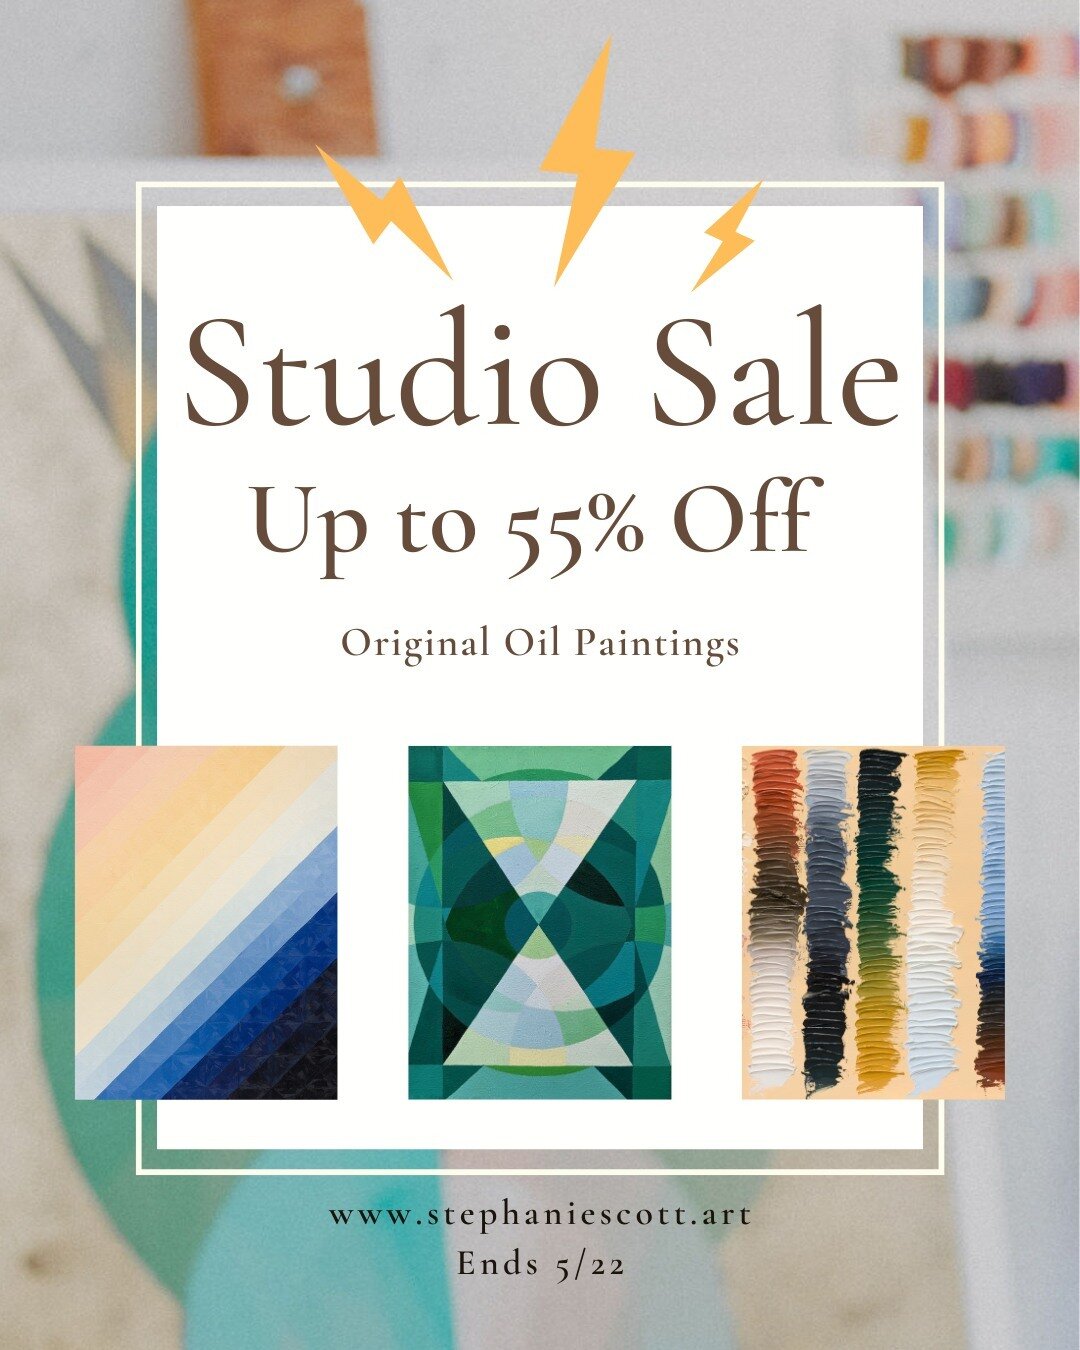 Studio Clearance Sale is now LIVE! Get up to 55% off of original oil paintings, starting at $65. Ships to US residents, free local pickup in Seattle. ⁠
⁠
#seattleartforsale #abstractoilpainter #paintingsforsale #bellevueartforsale #geometricpainting